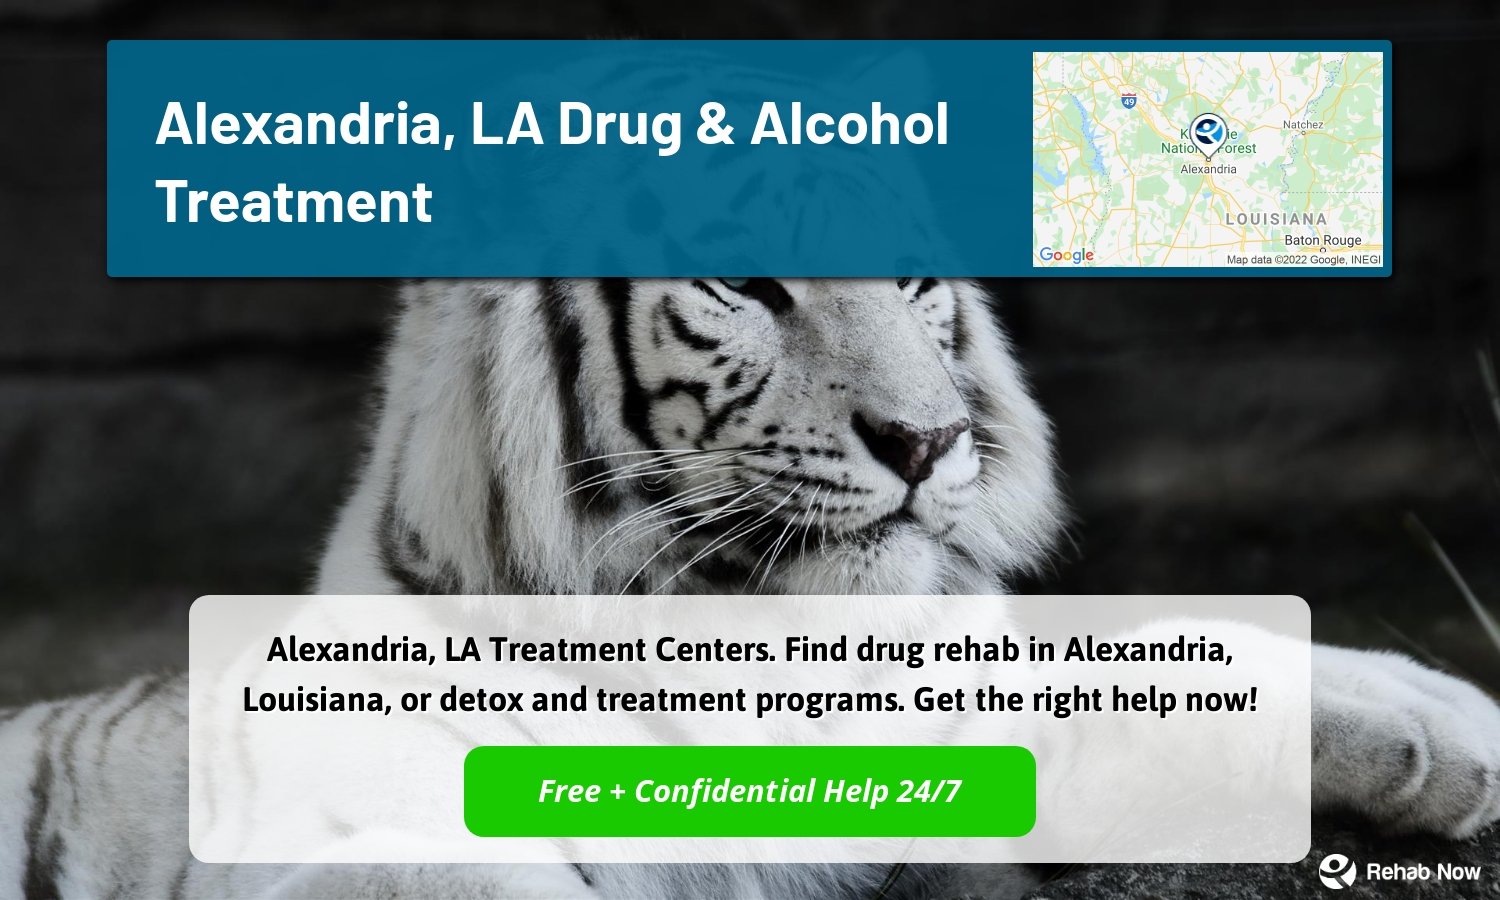 Alexandria, LA Treatment Centers. Find drug rehab in Alexandria, Louisiana, or detox and treatment programs. Get the right help now!